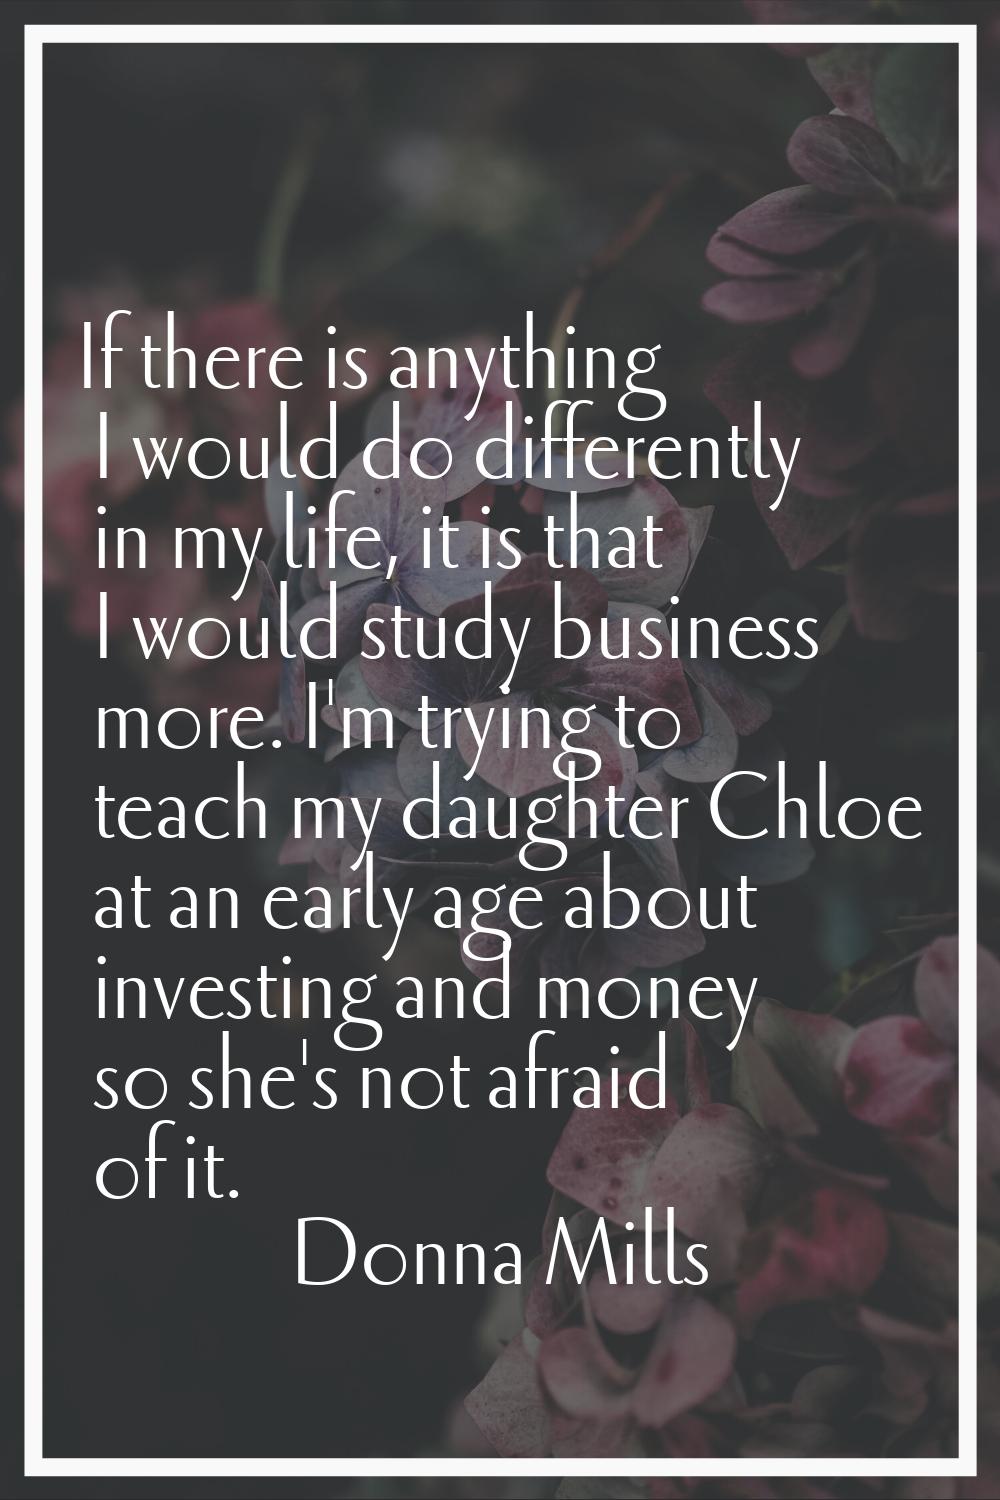 If there is anything I would do differently in my life, it is that I would study business more. I'm